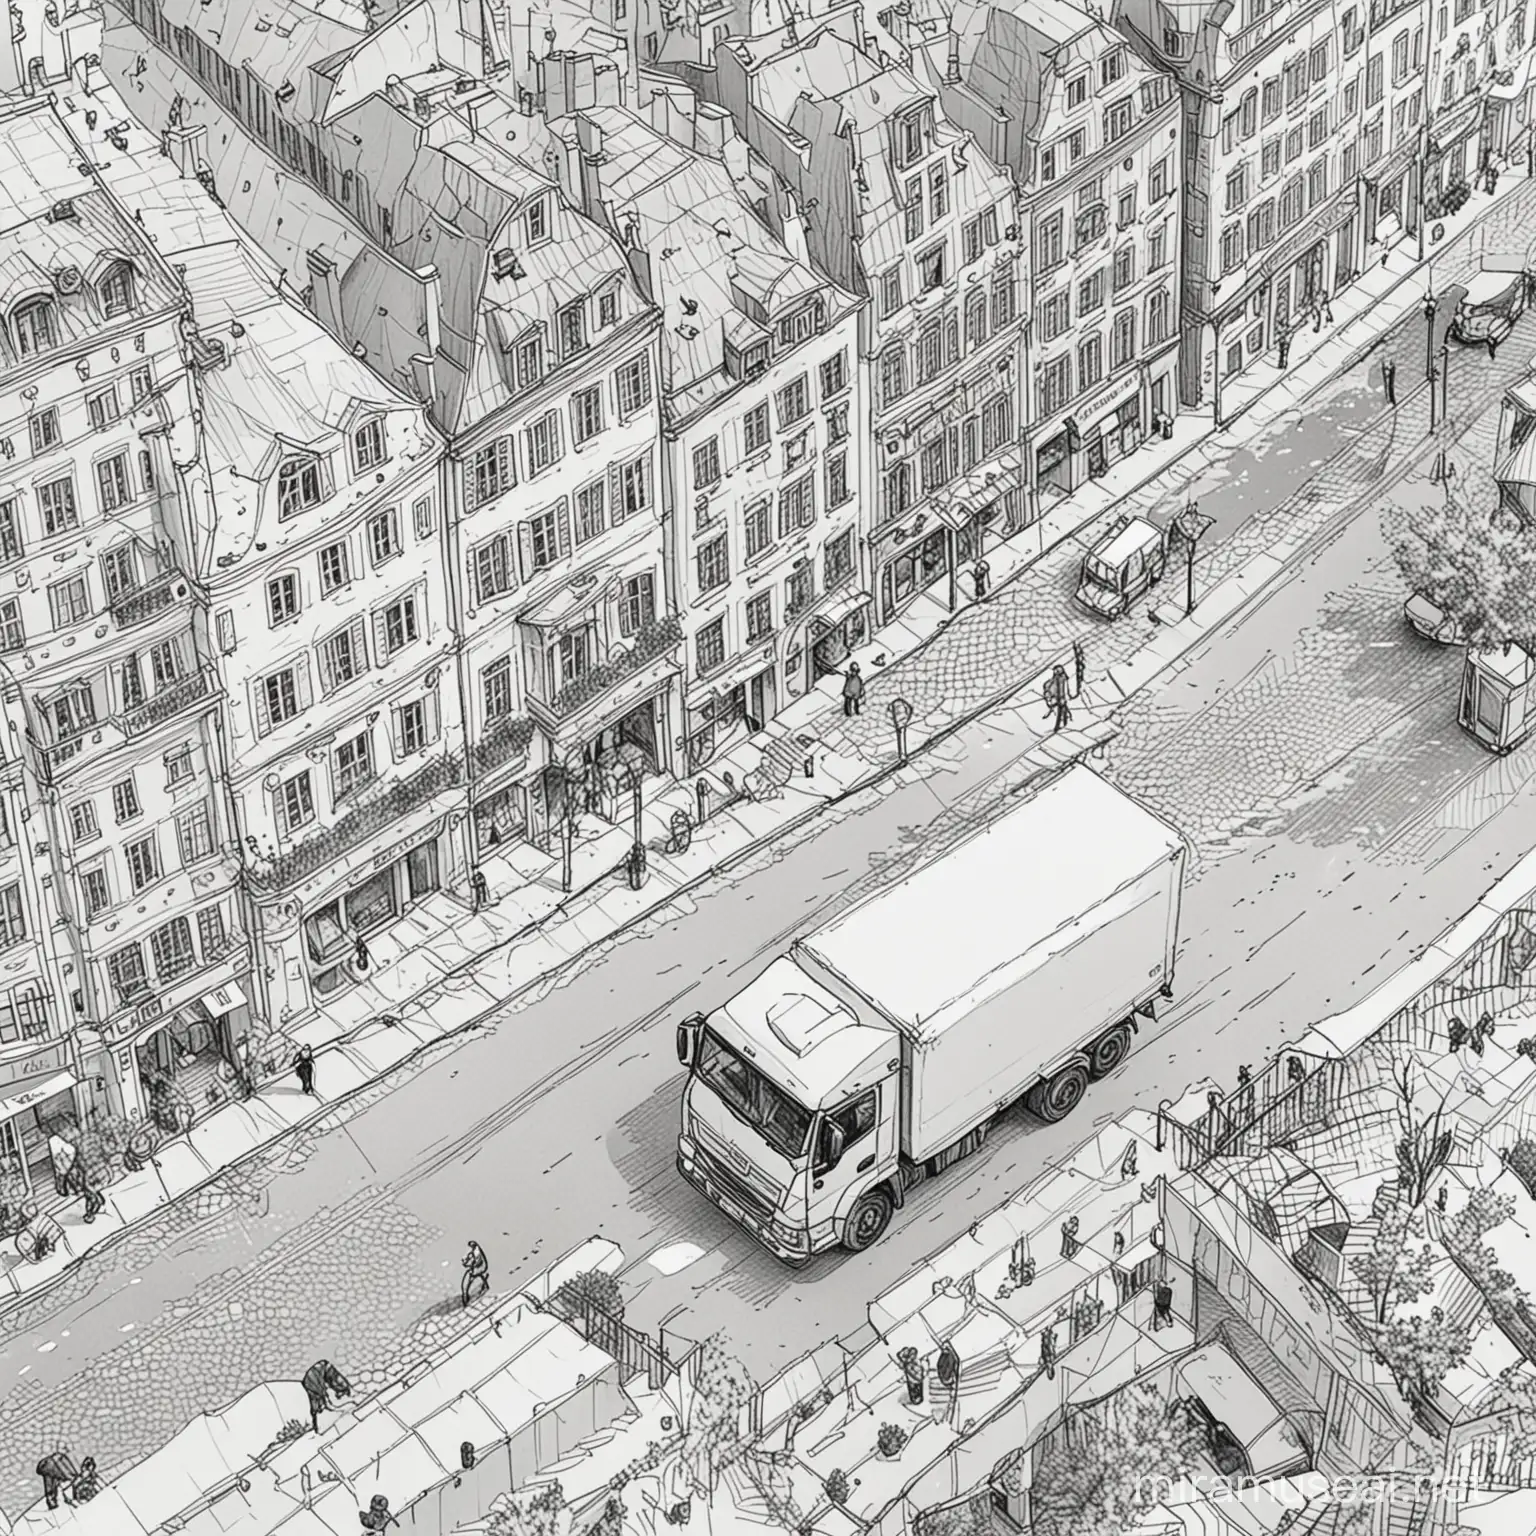 Medium Delivery Truck Driving Through European City in Simple Black and White Illustration